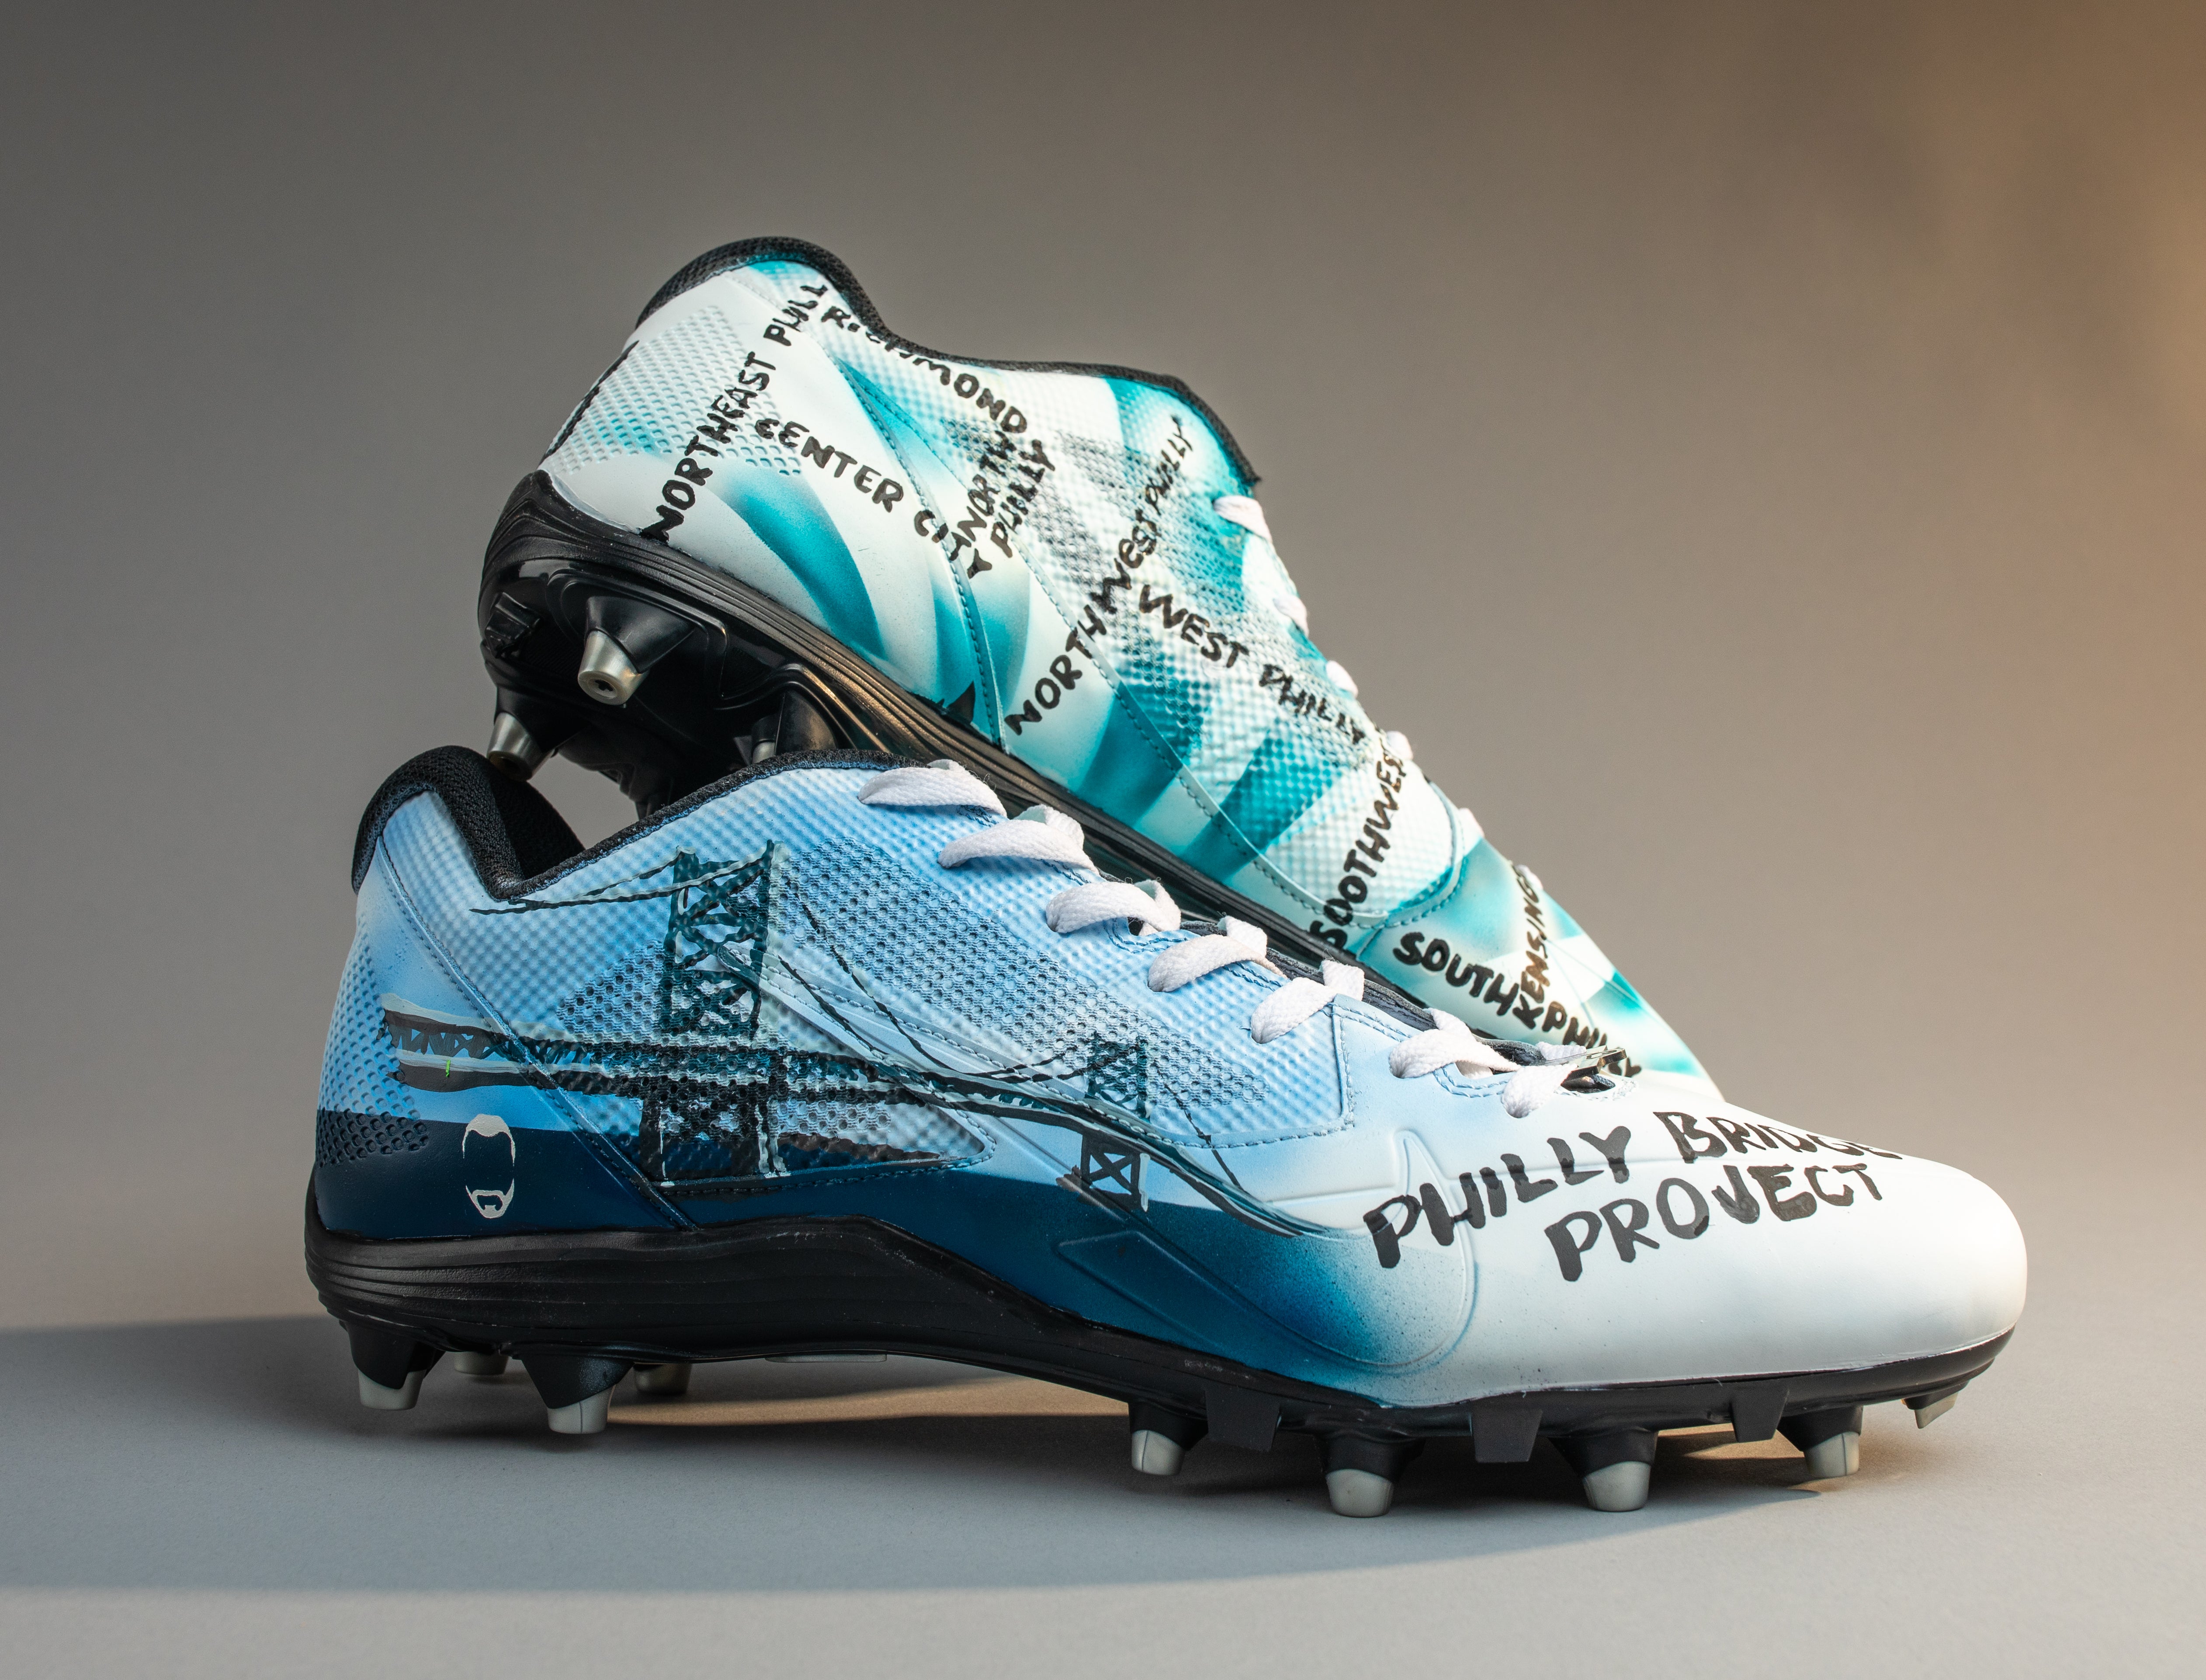 Customized cleats for Zach Ertz feature the Philly Bridge Project